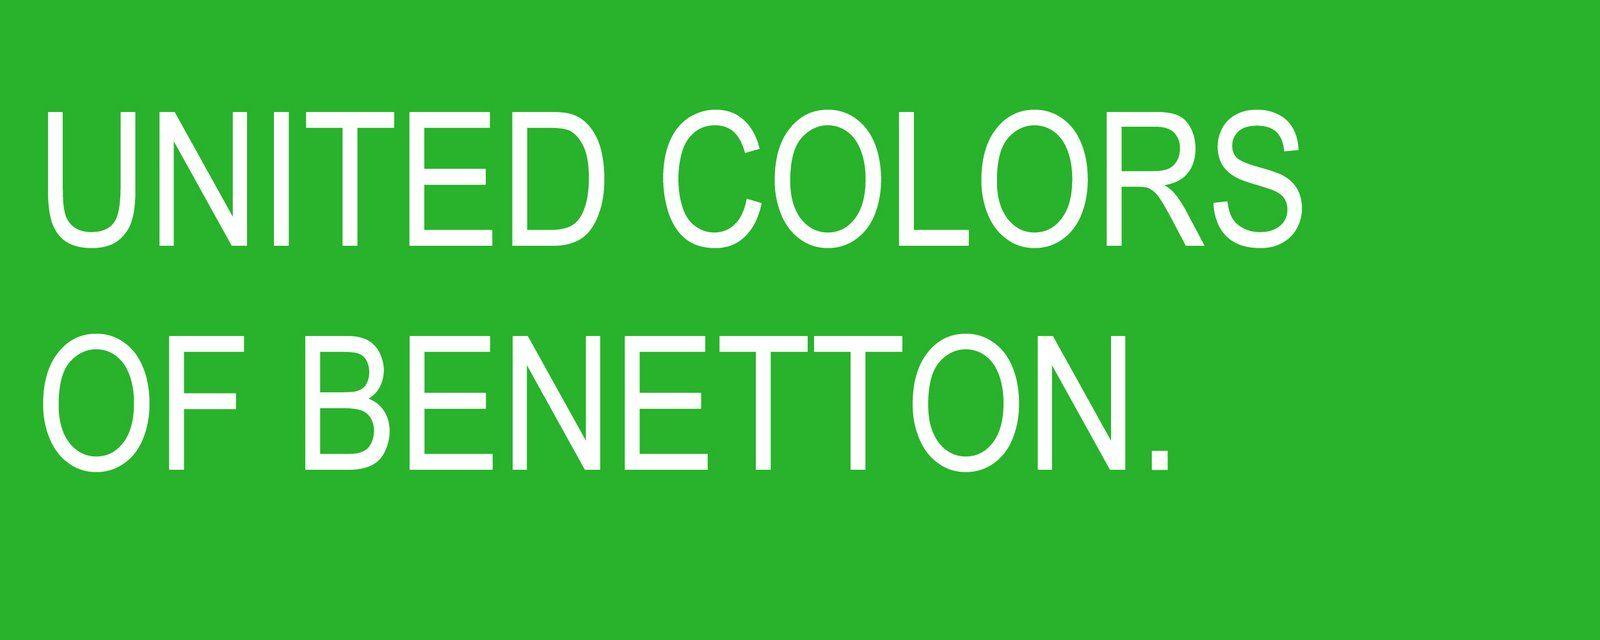 United Colors Logo - United colors of benetton Logos